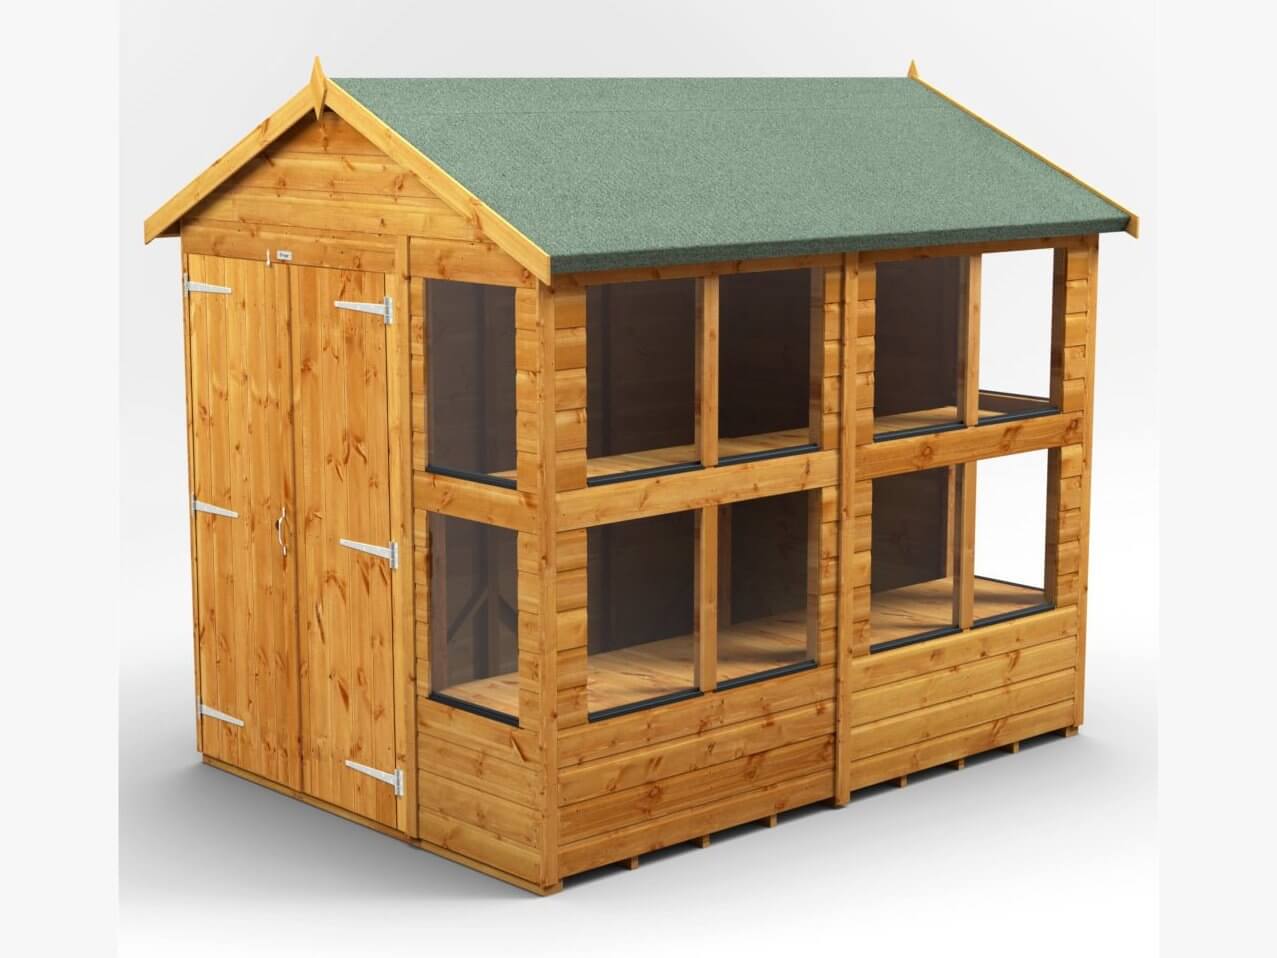 Power Apex Wooden Potting Shed Various Sizes Shed Sizes: Power Apex Potting Shed 8x6